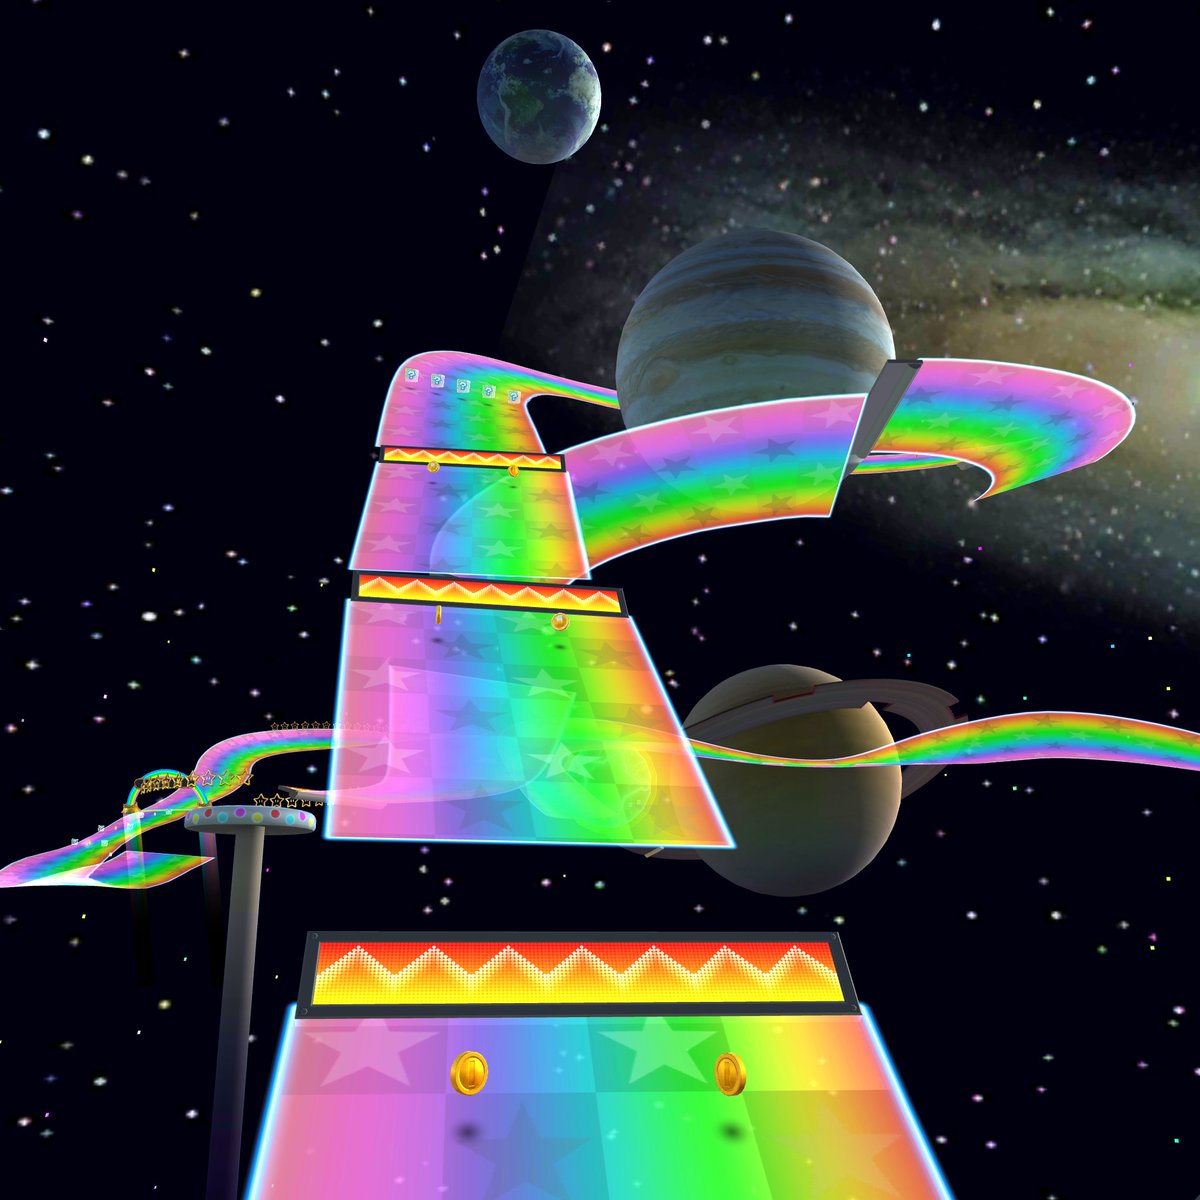 Mario Kart Tour 3ds Rainbow Road Delivers On Exactly What The Name Promises A Rainbow Colored Track That Twists And Turns Through Outer Space Race Past Planets And Ride The Rings